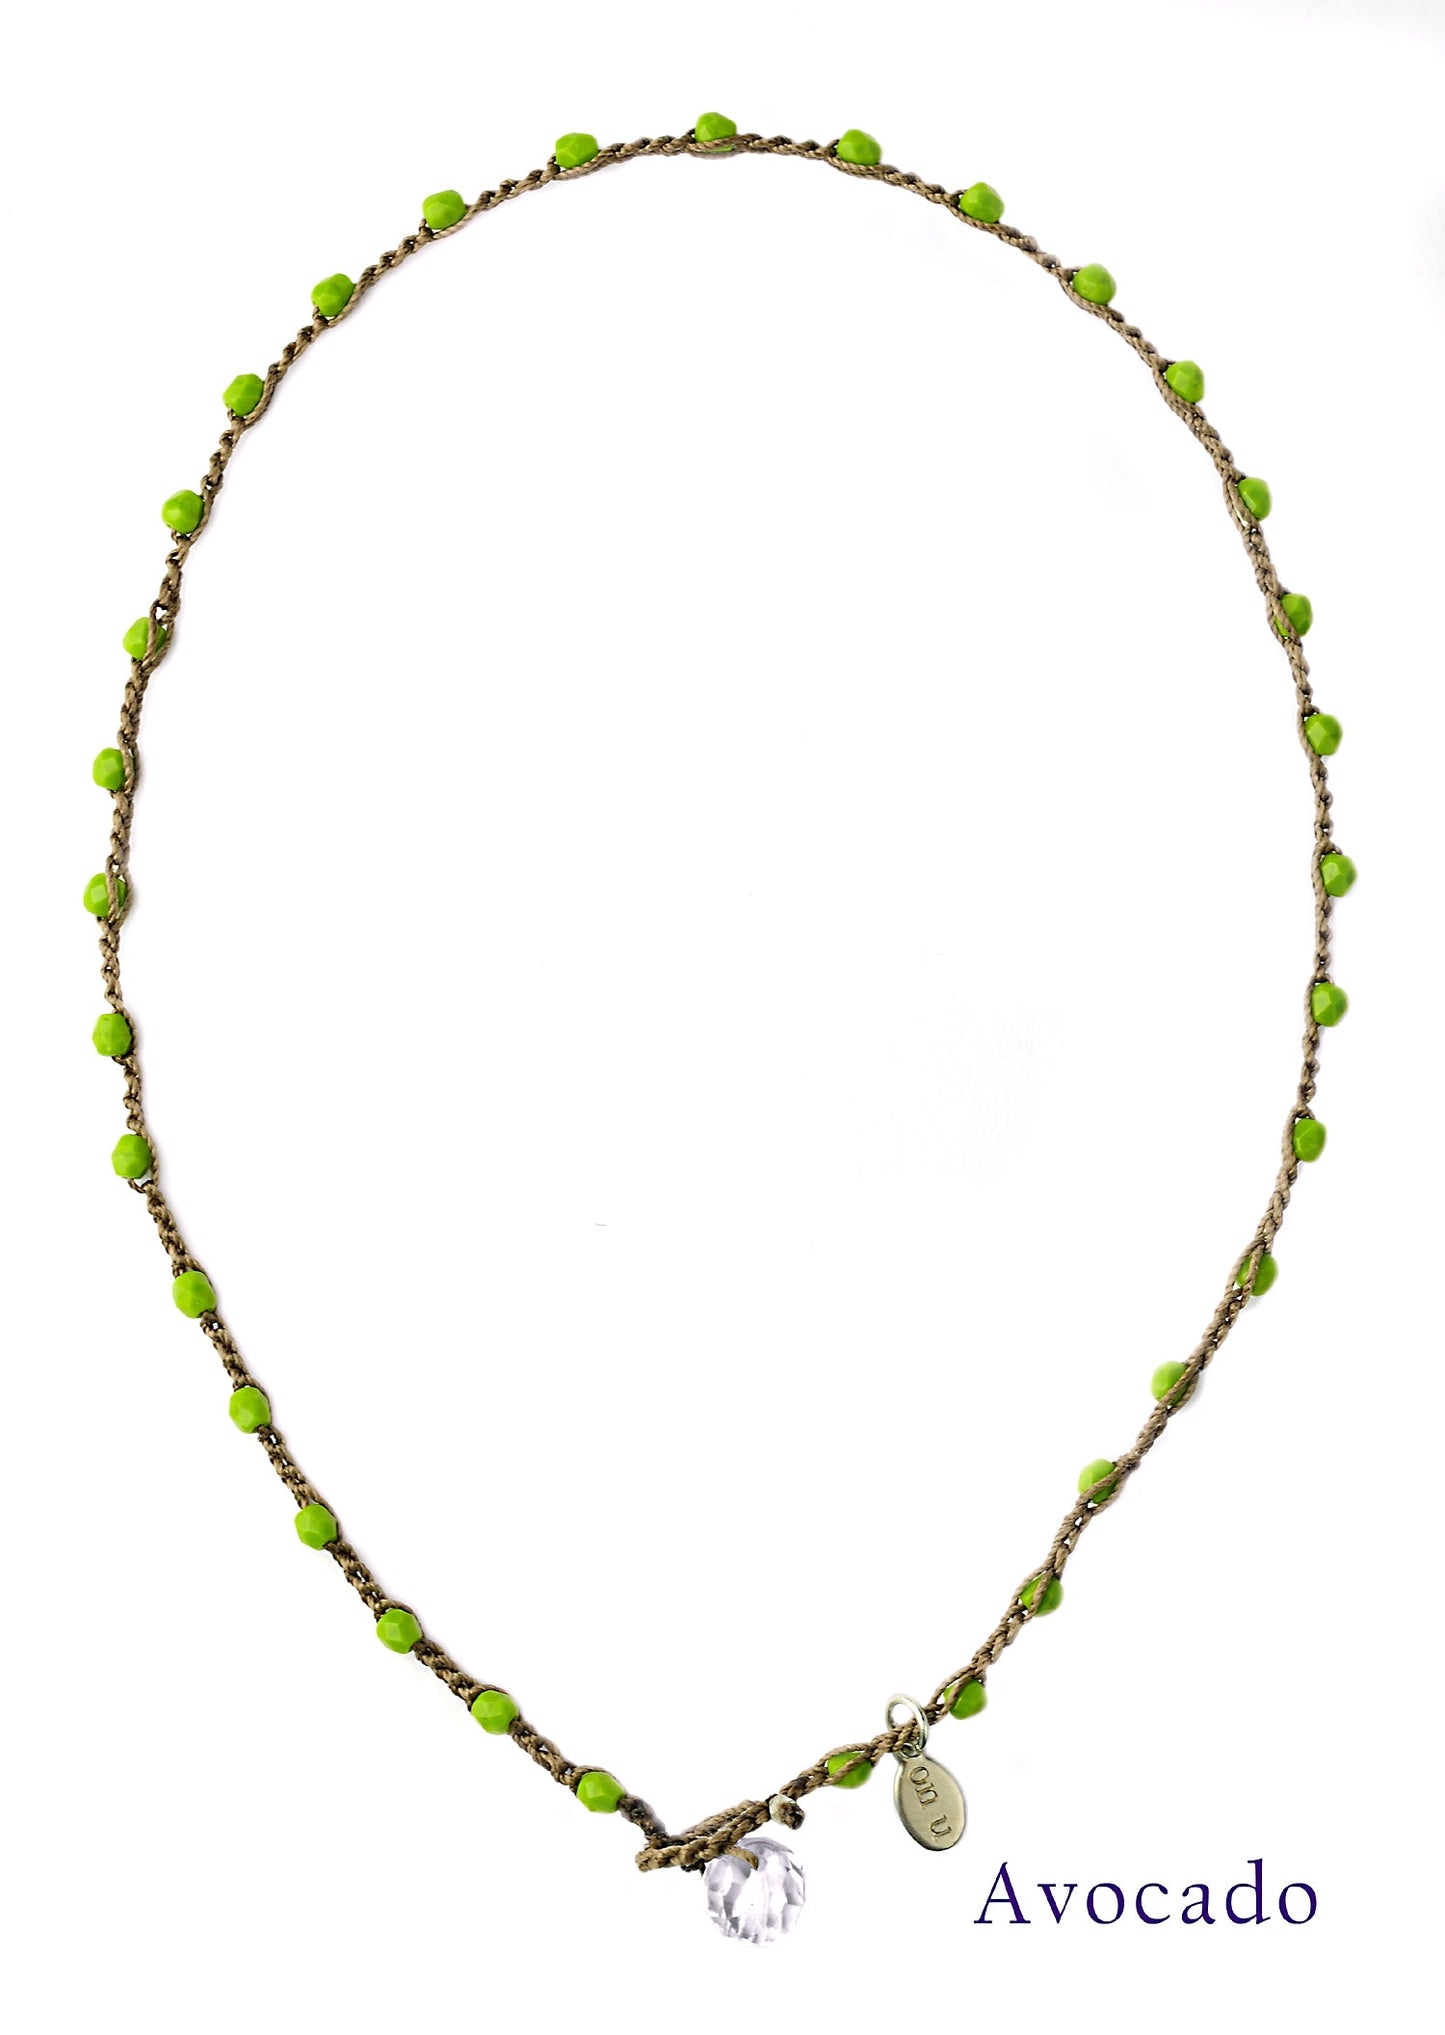 onujewelry.com - Small Bead Dot Necklace in Avocado.  Designed, and created, by Donna Silvestri, On U Jewelry, Richmond, VA